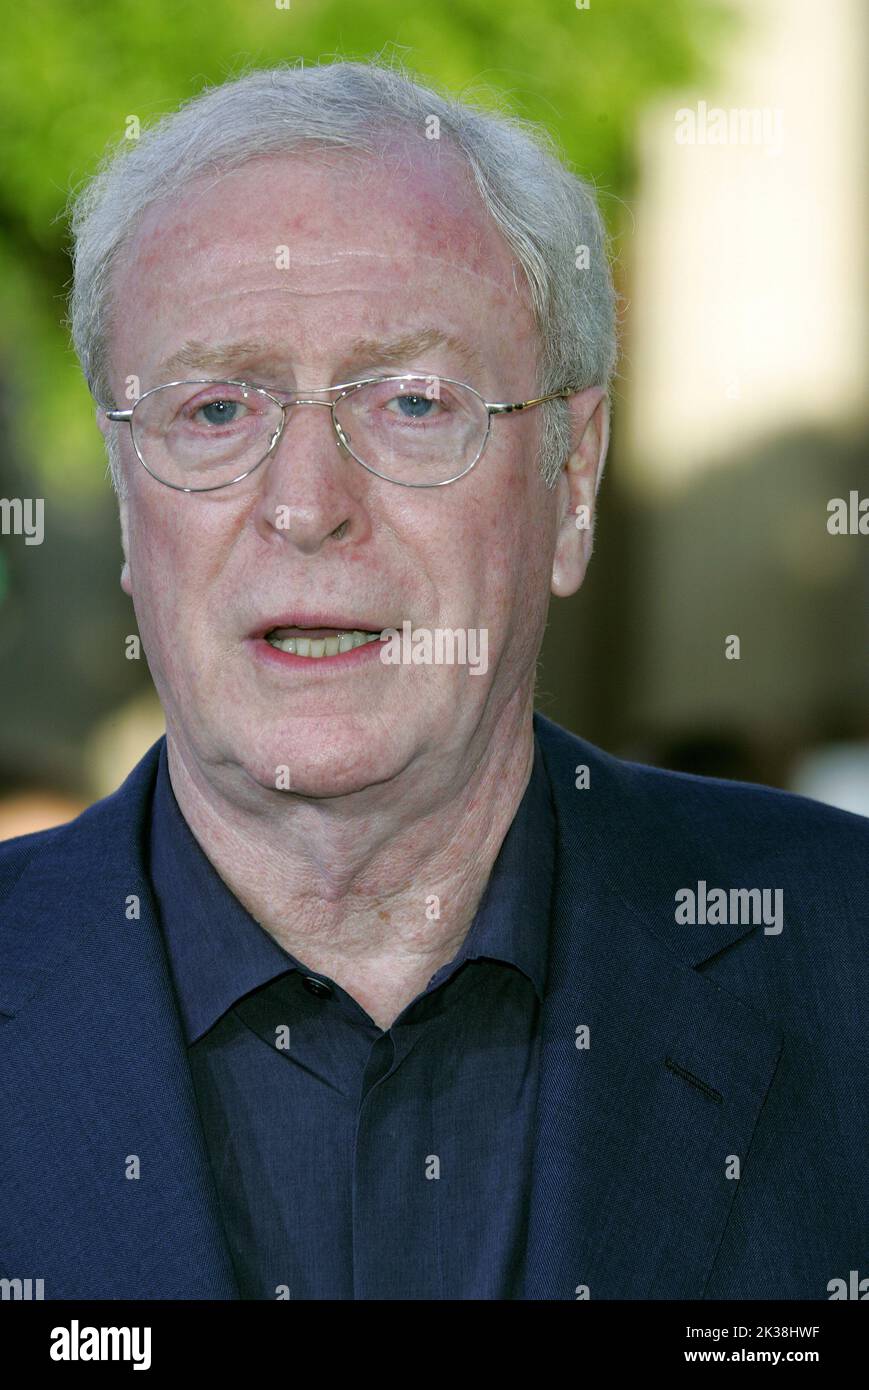 SIR MICHAEL CAINE ACTOR BATMAN BEGINS CHINESE THEATRE, HOLLYWOOD LOS ANGELES, USA 06/06/2005 LAM51609 Stock Photo